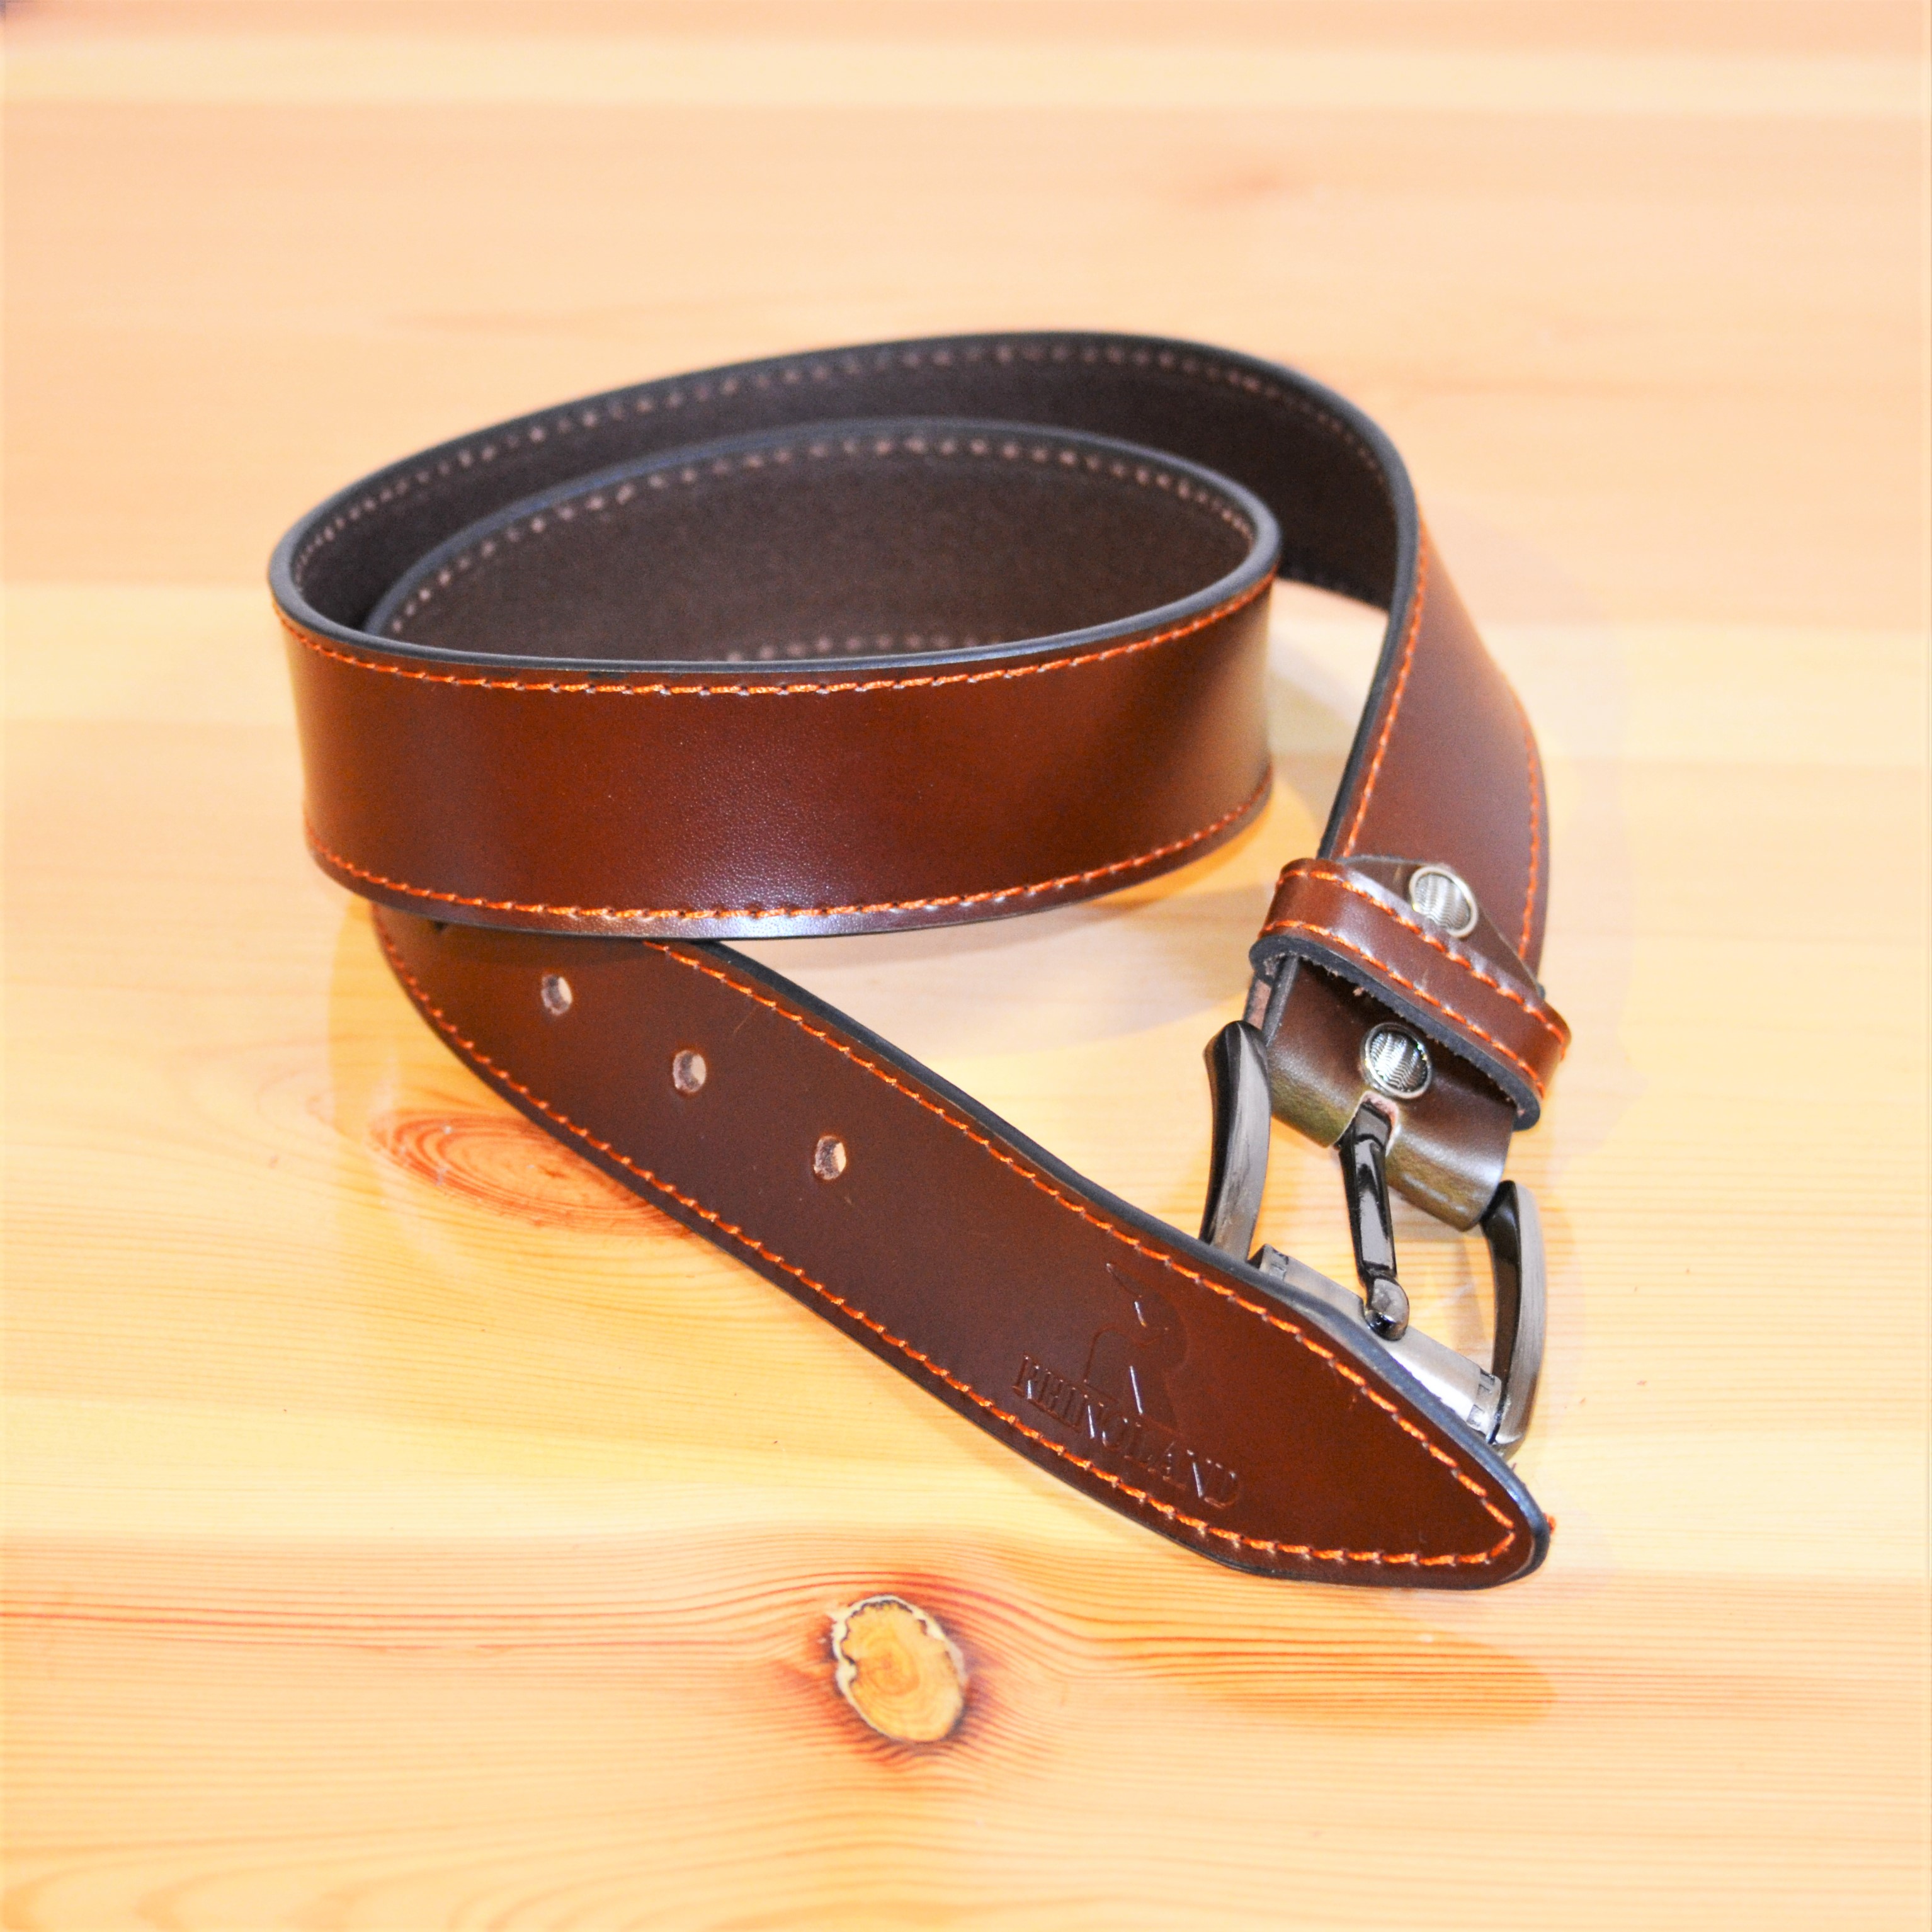 Genuine Leather Belt For Men With Stiches